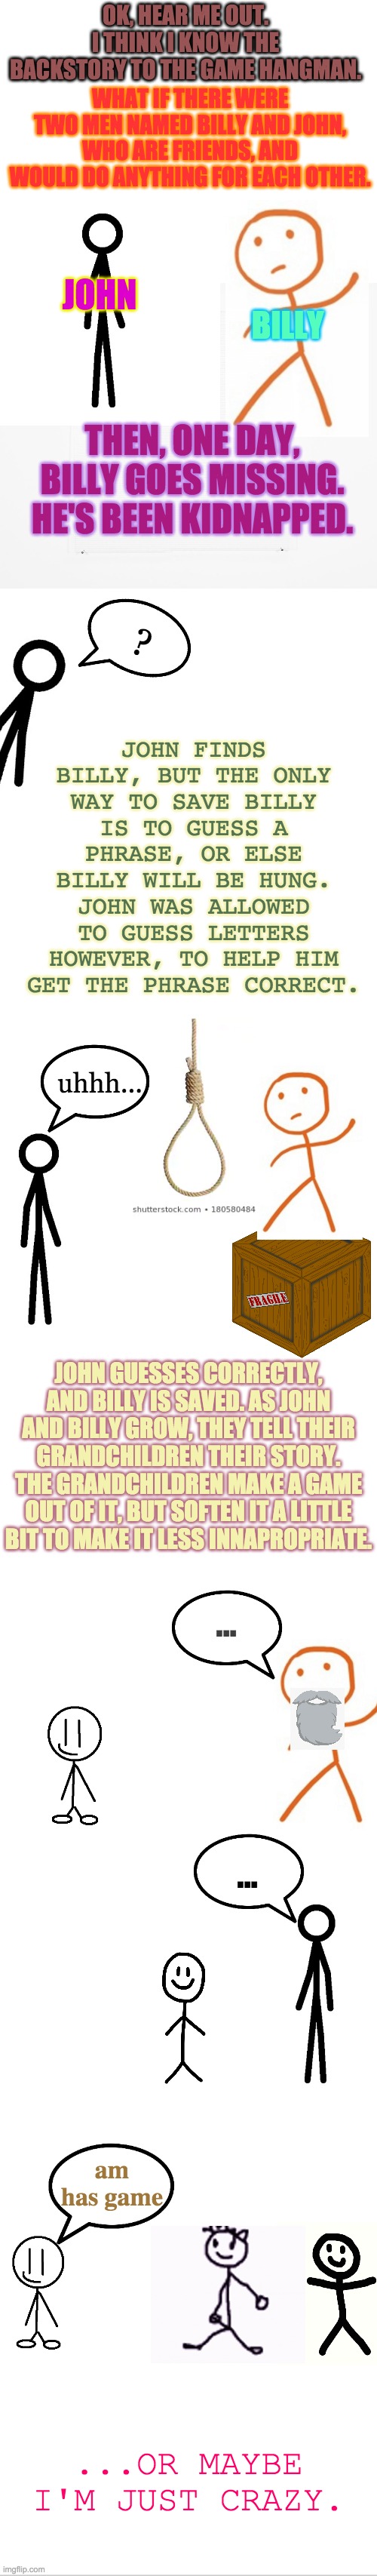 The Story Behind The Game Hangman | OK, HEAR ME OUT.
I THINK I KNOW THE BACKSTORY TO THE GAME HANGMAN. WHAT IF THERE WERE TWO MEN NAMED BILLY AND JOHN, WHO ARE FRIENDS, AND WOULD DO ANYTHING FOR EACH OTHER. JOHN; BILLY; THEN, ONE DAY, BILLY GOES MISSING. HE'S BEEN KIDNAPPED. ? JOHN FINDS BILLY, BUT THE ONLY WAY TO SAVE BILLY IS TO GUESS A PHRASE, OR ELSE BILLY WILL BE HUNG. JOHN WAS ALLOWED TO GUESS LETTERS HOWEVER, TO HELP HIM GET THE PHRASE CORRECT. uhhh... JOHN GUESSES CORRECTLY, AND BILLY IS SAVED. AS JOHN AND BILLY GROW, THEY TELL THEIR GRANDCHILDREN THEIR STORY. THE GRANDCHILDREN MAKE A GAME OUT OF IT, BUT SOFTEN IT A LITTLE BIT TO MAKE IT LESS INNAPROPRIATE. ... ... am has game; ...OR MAYBE I'M JUST CRAZY. | image tagged in blank white template,blank,hangman,theory | made w/ Imgflip meme maker